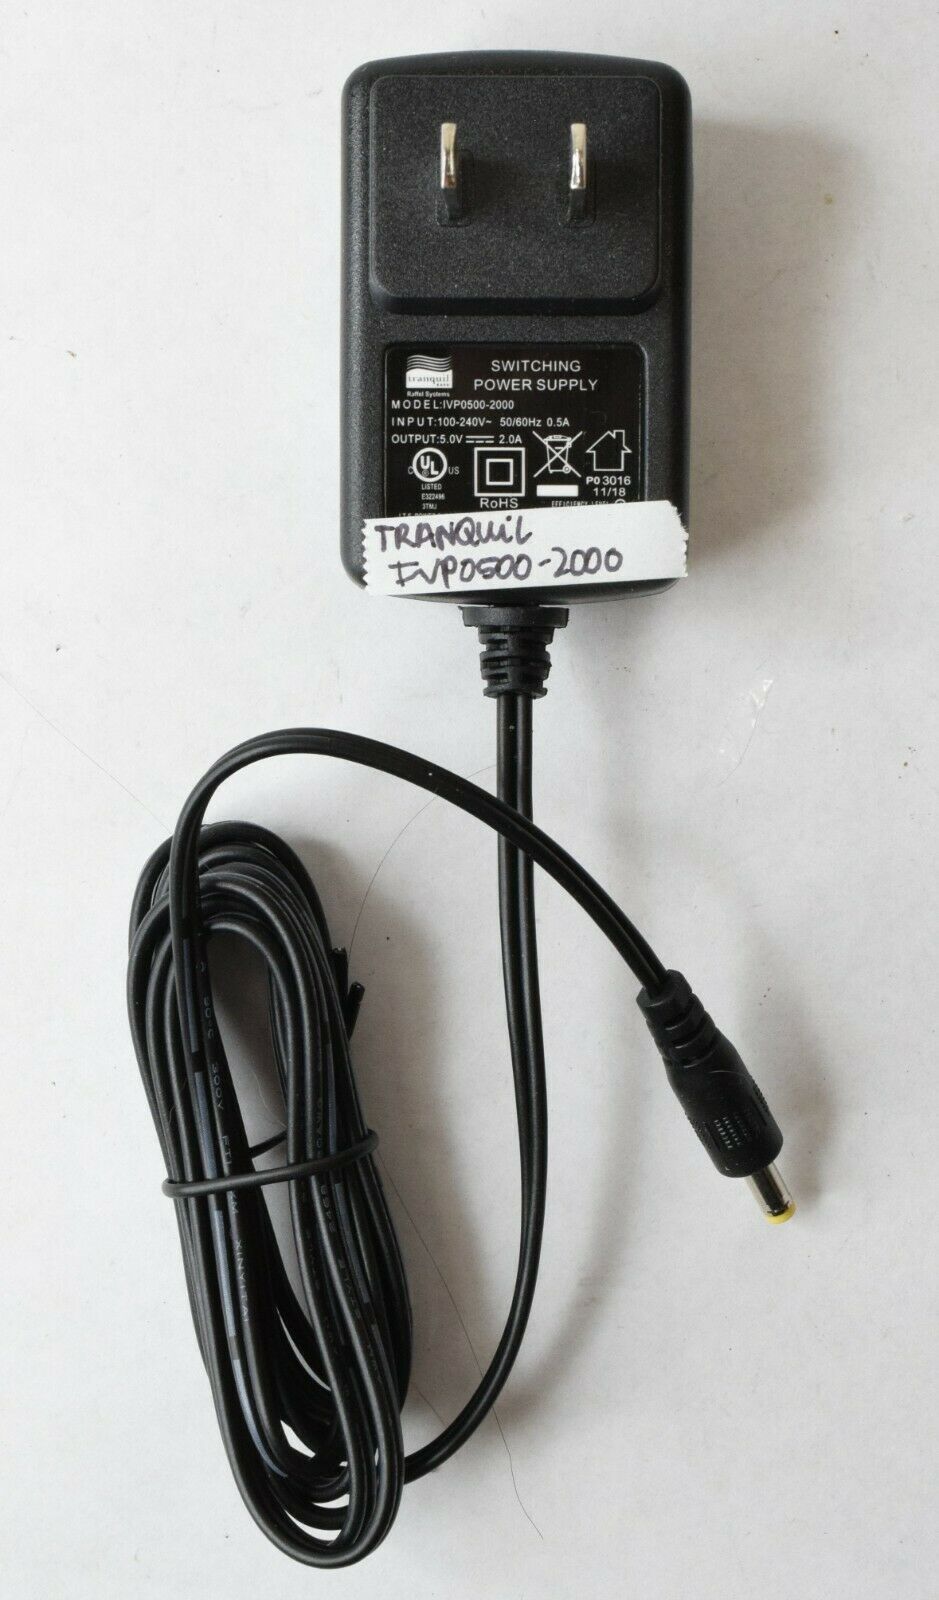 Tranquil Switching Power Supply Adapter Unit IVP05000-2000 5V 2A Type: Adapter Output Voltage: 5 V Features: Powered Br